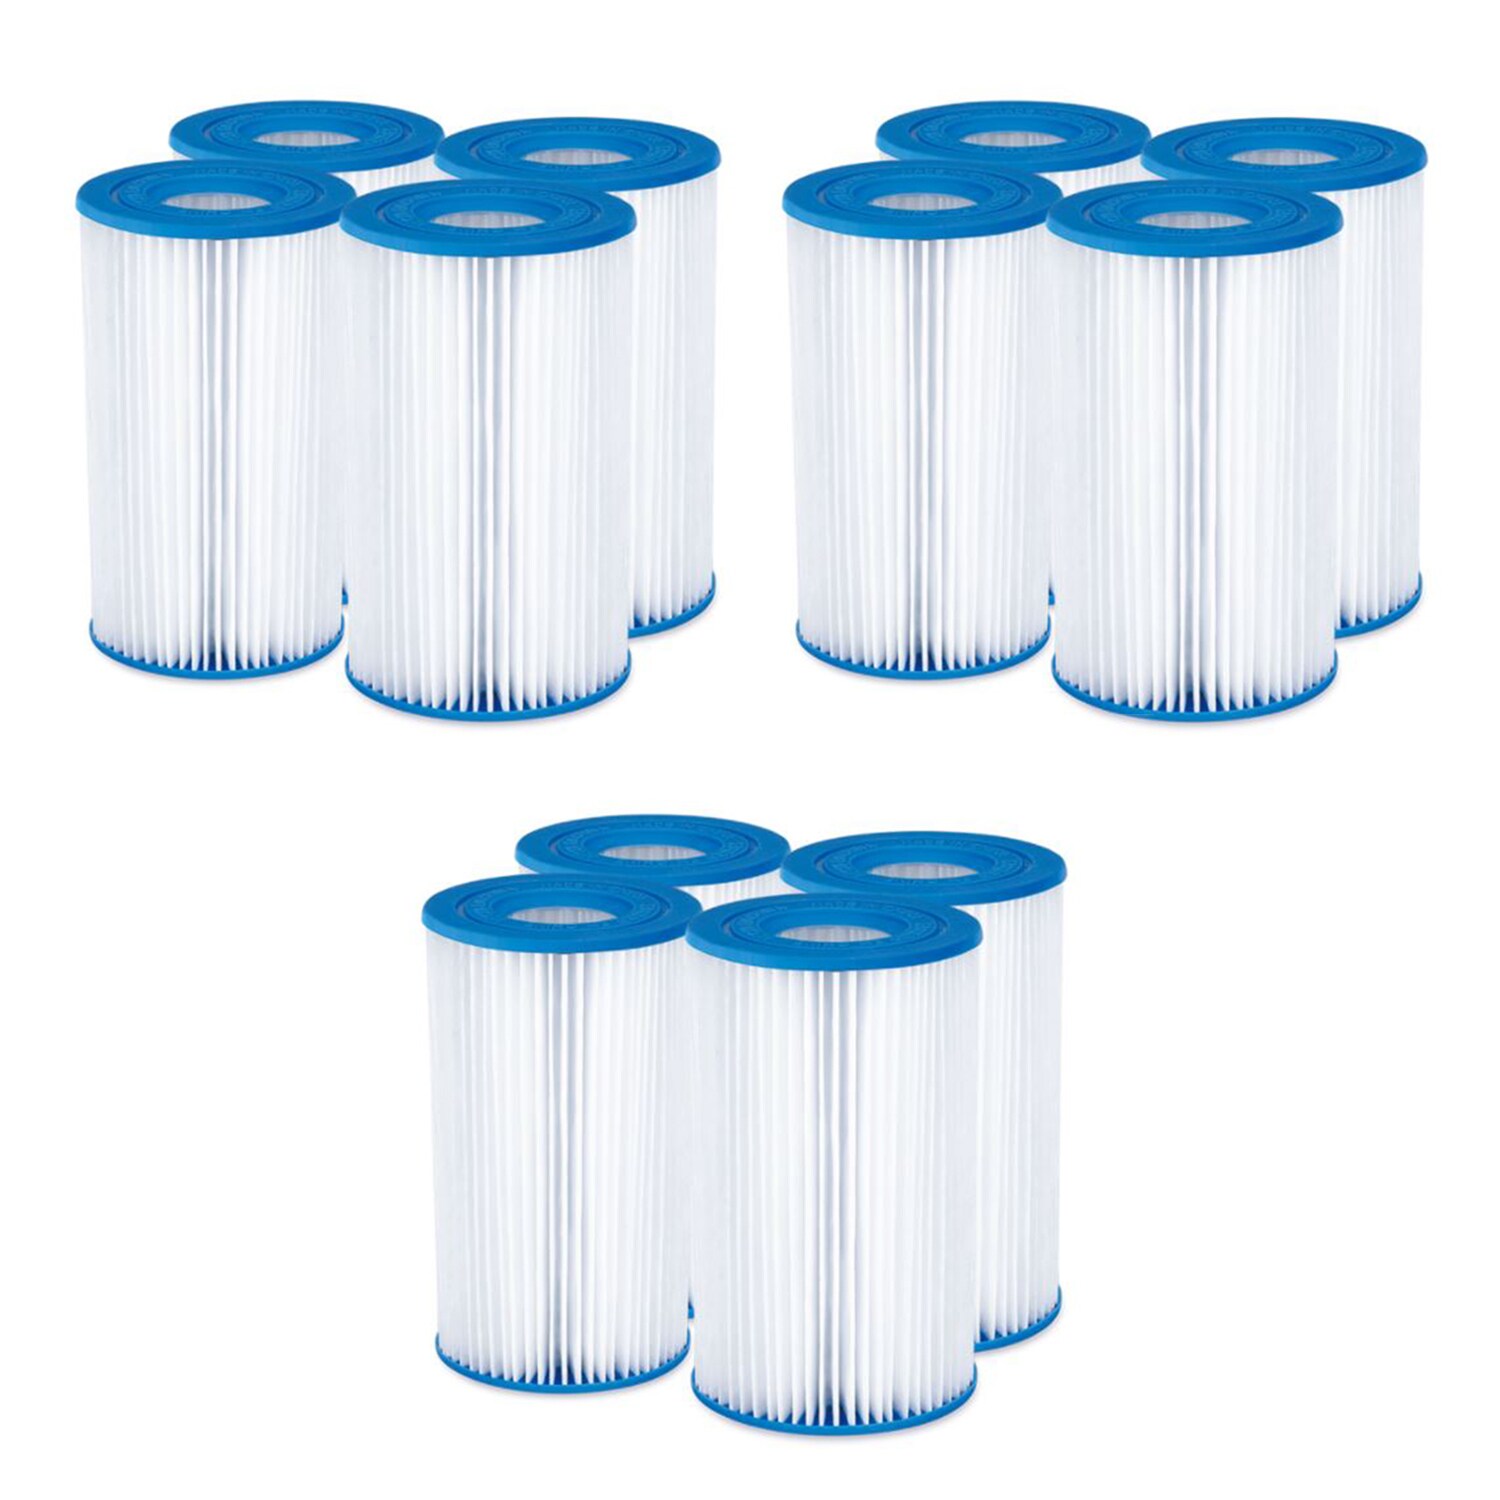 Summer Waves Universal Pool Filter Cartridge Replacement Type A or C 2-Pack New 